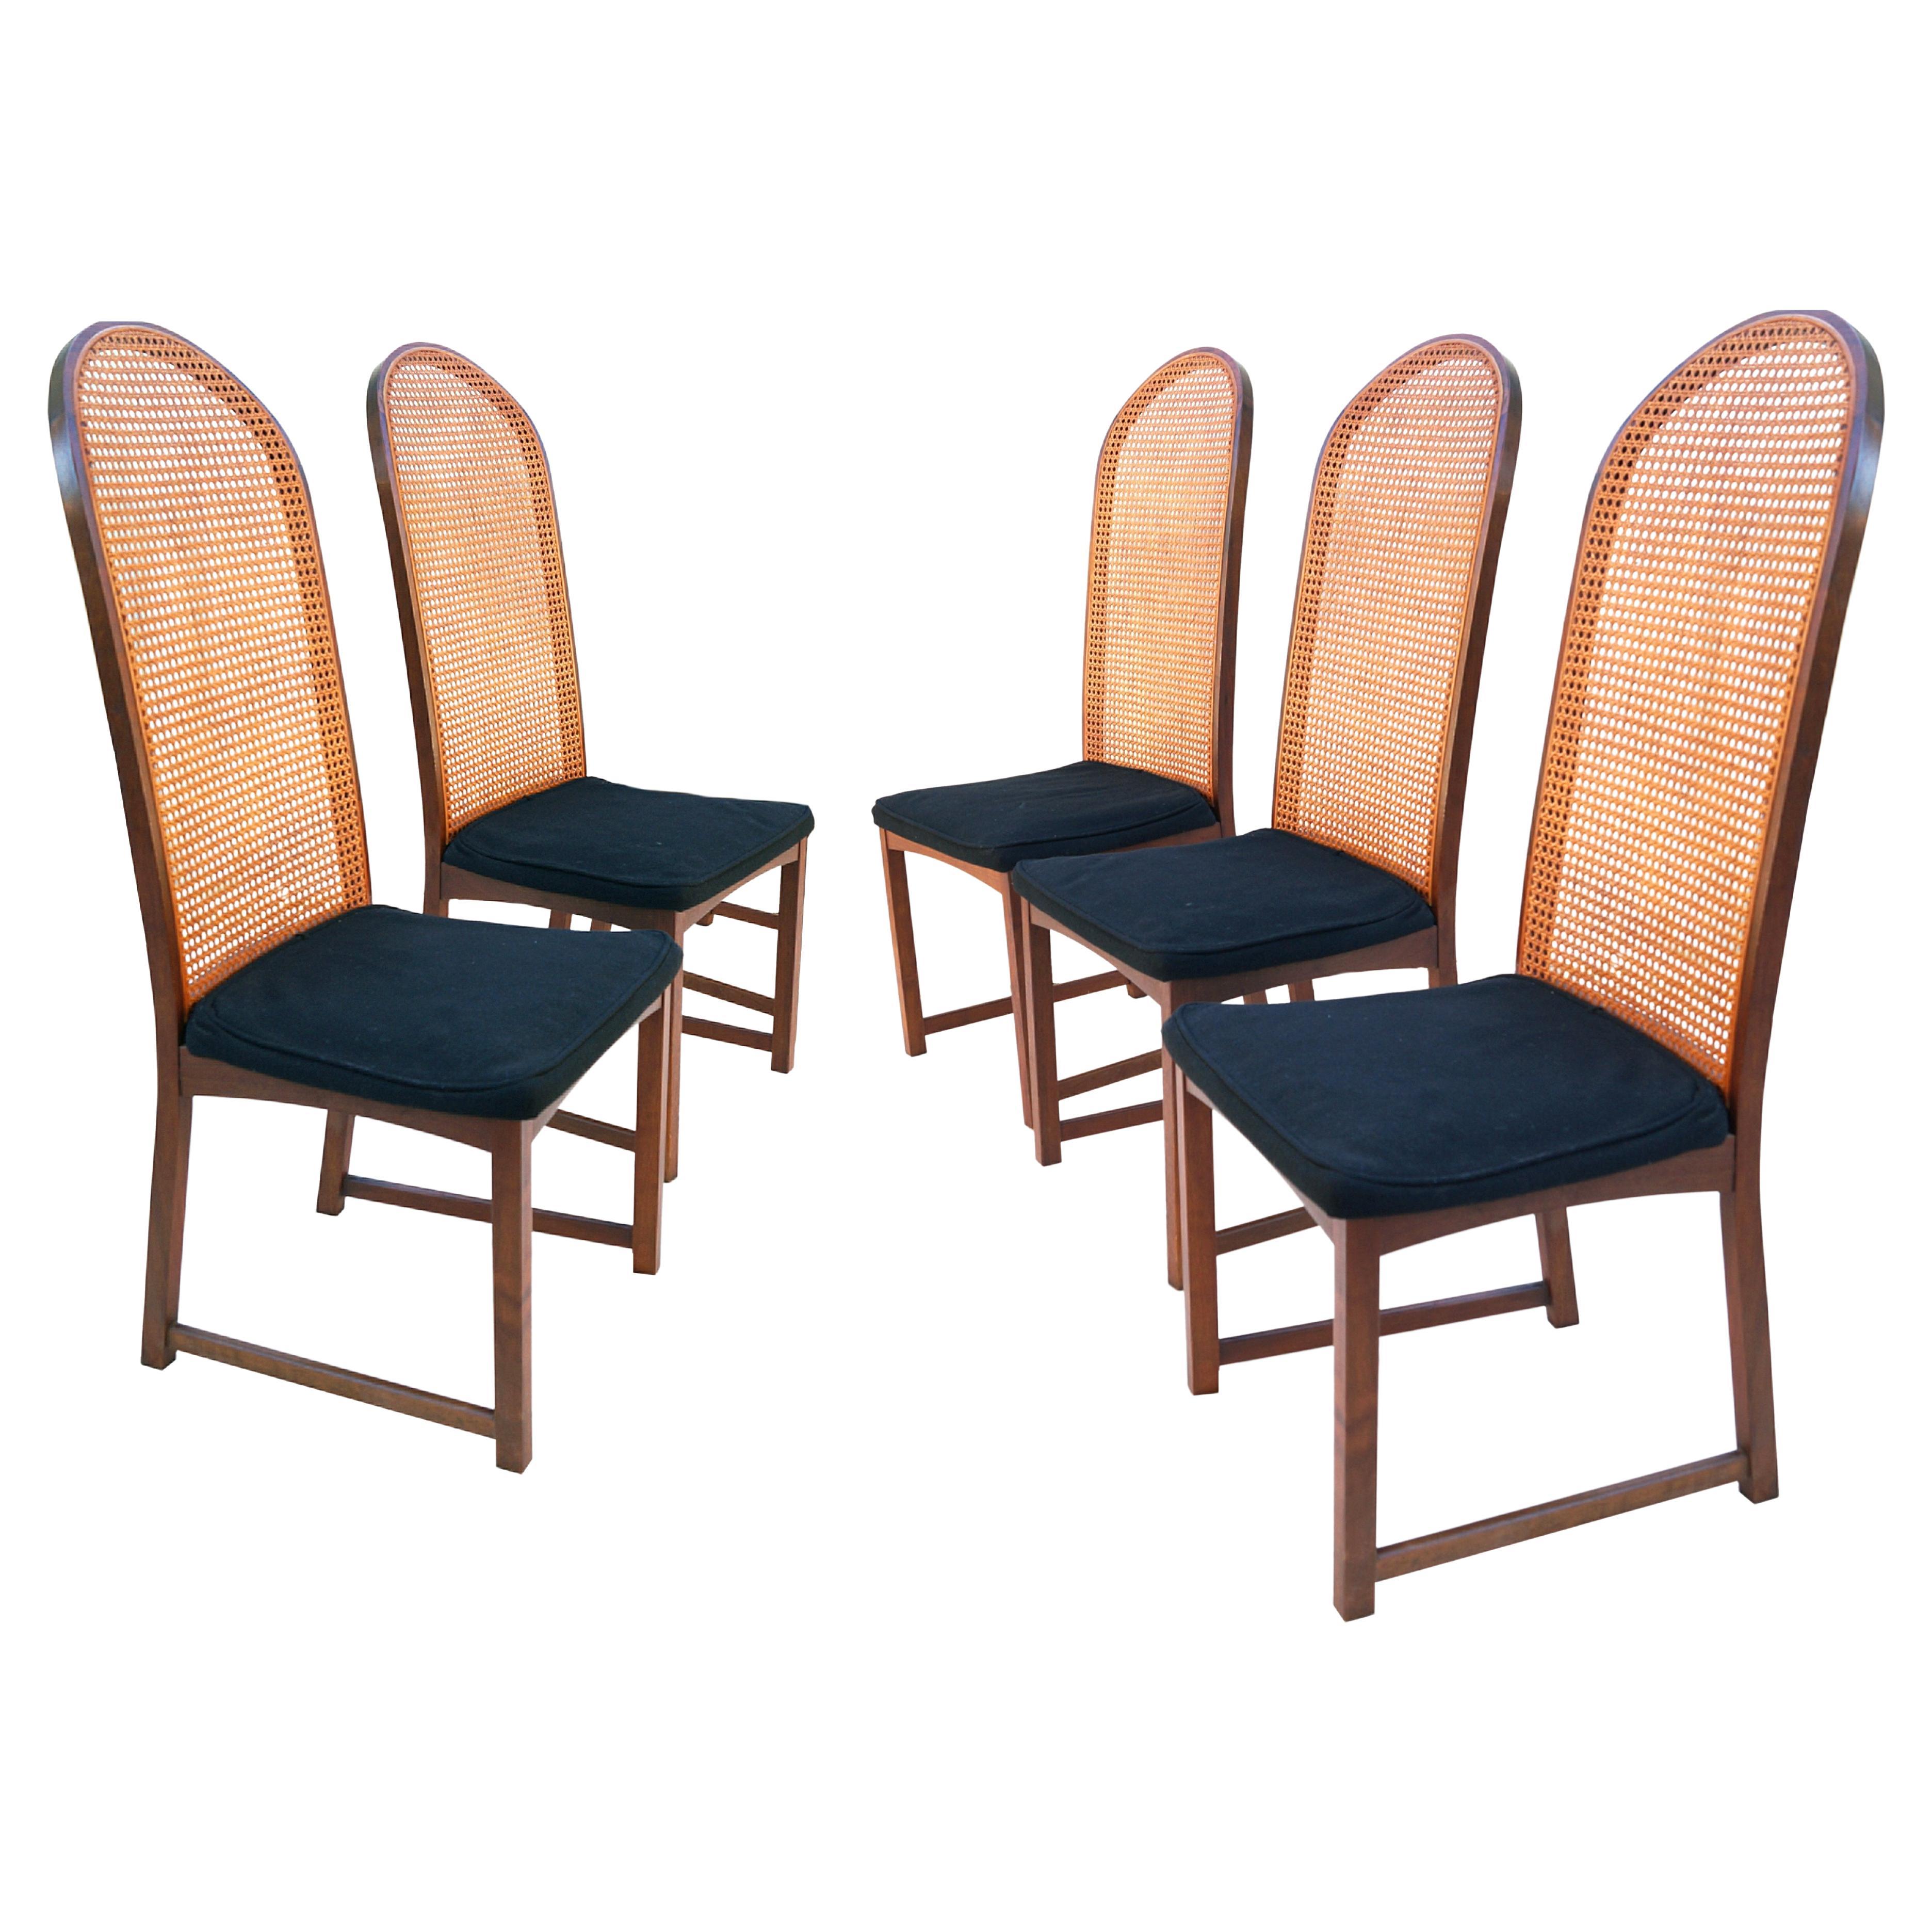 Set of 5 Milo Baughman Curved Cane Back Dining Chairs